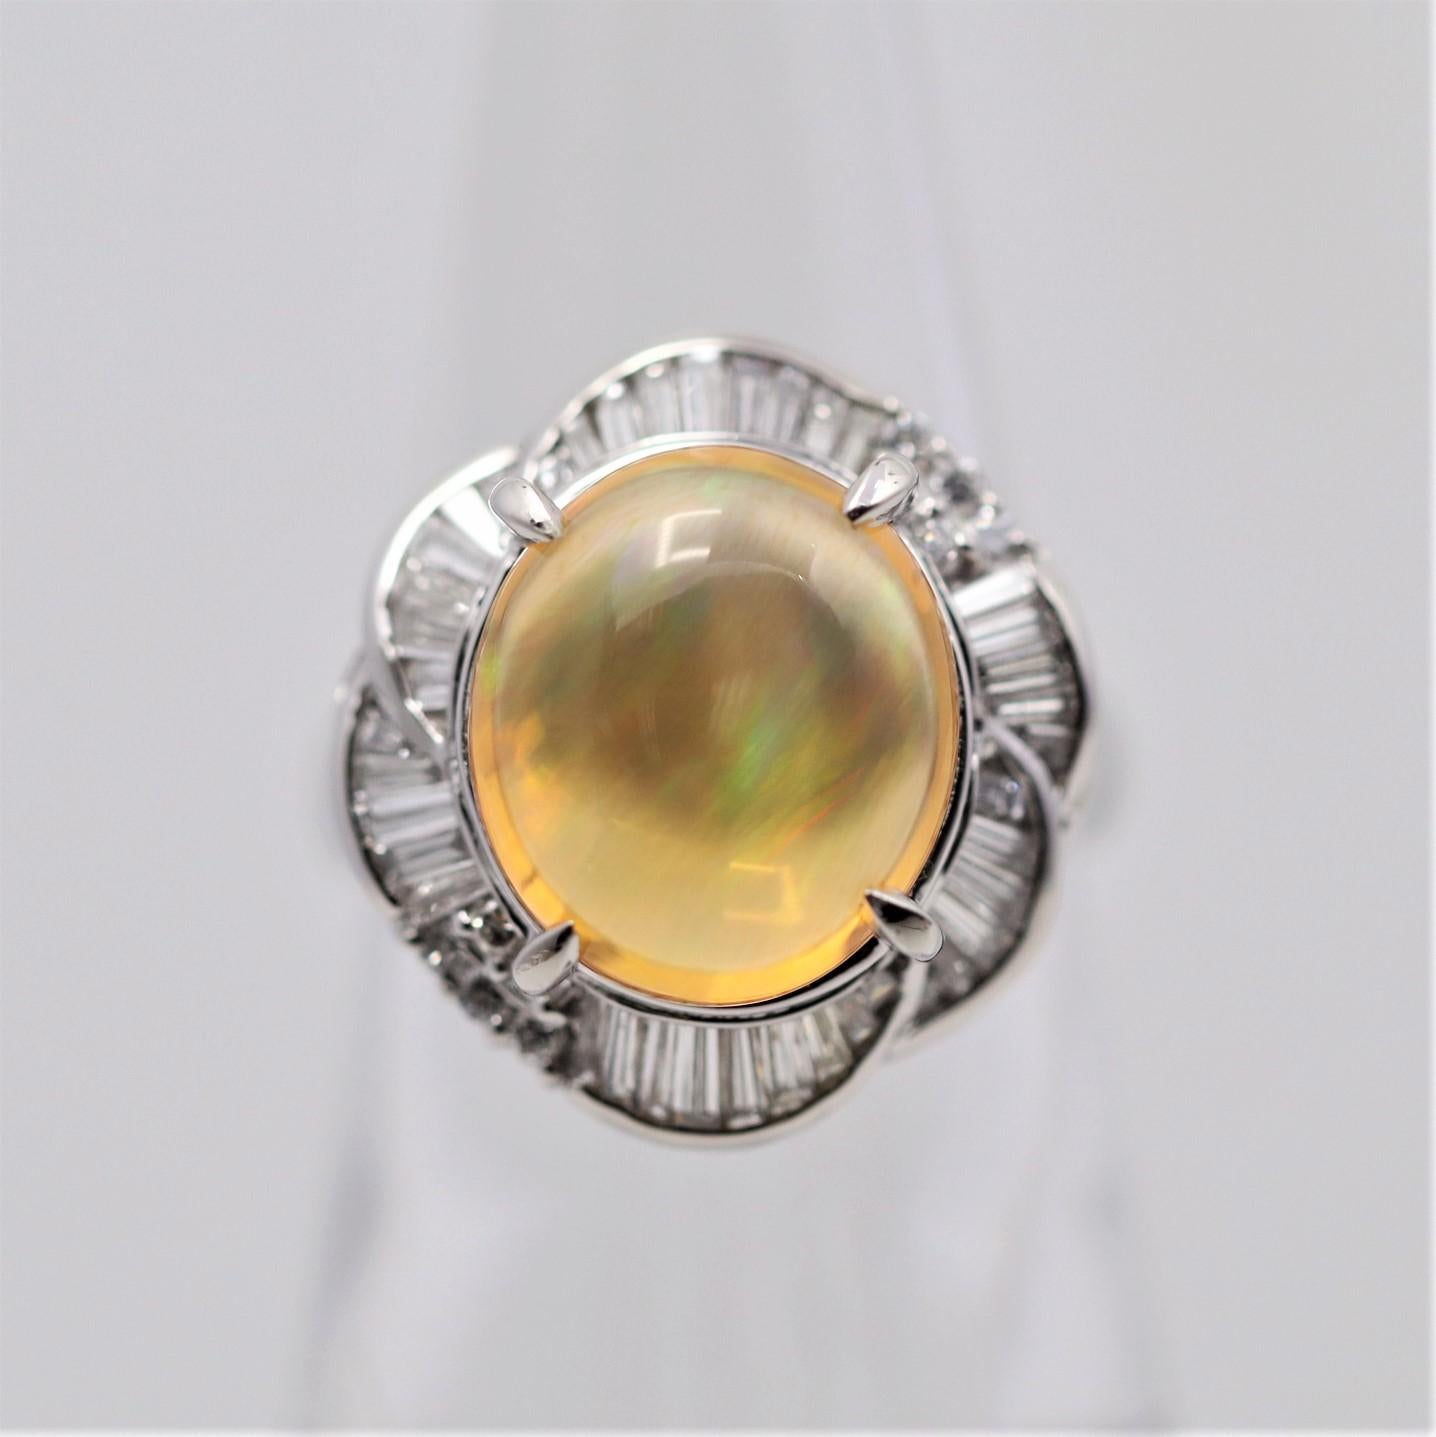 A superb fire opal from Mexico weighing 5.06 carats. It has excellent play of color as flashes of orange, green and blue. It is accented by 0.85 carats of diamonds set around it in a spiral pattern. Hand-fabricated in platinum and ready to be